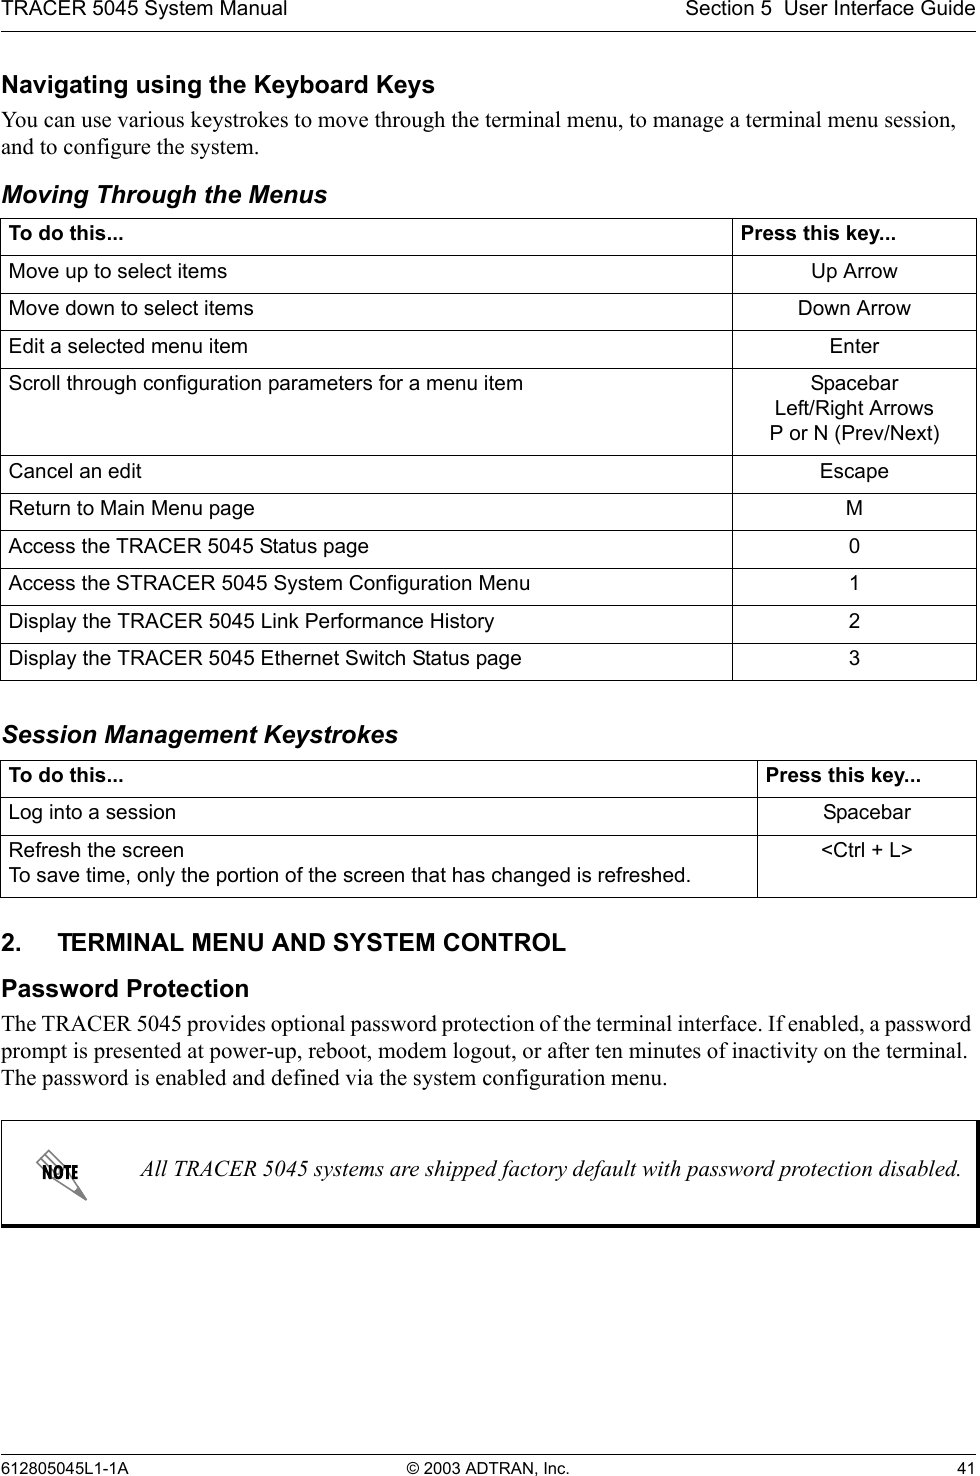 TRACER 5045 System Manual Section 5  User Interface Guide612805045L1-1A © 2003 ADTRAN, Inc. 41Navigating using the Keyboard KeysYou can use various keystrokes to move through the terminal menu, to manage a terminal menu session, and to configure the system.Moving Through the MenusSession Management Keystrokes2. TERMINAL MENU AND SYSTEM CONTROLPassword ProtectionThe TRACER 5045 provides optional password protection of the terminal interface. If enabled, a password prompt is presented at power-up, reboot, modem logout, or after ten minutes of inactivity on the terminal. The password is enabled and defined via the system configuration menu.To do this... Press this key...Move up to select items Up ArrowMove down to select items Down ArrowEdit a selected menu item EnterScroll through configuration parameters for a menu item SpacebarLeft/Right ArrowsP or N (Prev/Next)Cancel an edit EscapeReturn to Main Menu page MAccess the TRACER 5045 Status page 0Access the STRACER 5045 System Configuration Menu 1Display the TRACER 5045 Link Performance History 2Display the TRACER 5045 Ethernet Switch Status page 3To do this... Press this key...Log into a session SpacebarRefresh the screenTo save time, only the portion of the screen that has changed is refreshed. &lt;Ctrl + L&gt;All TRACER 5045 systems are shipped factory default with password protection disabled.